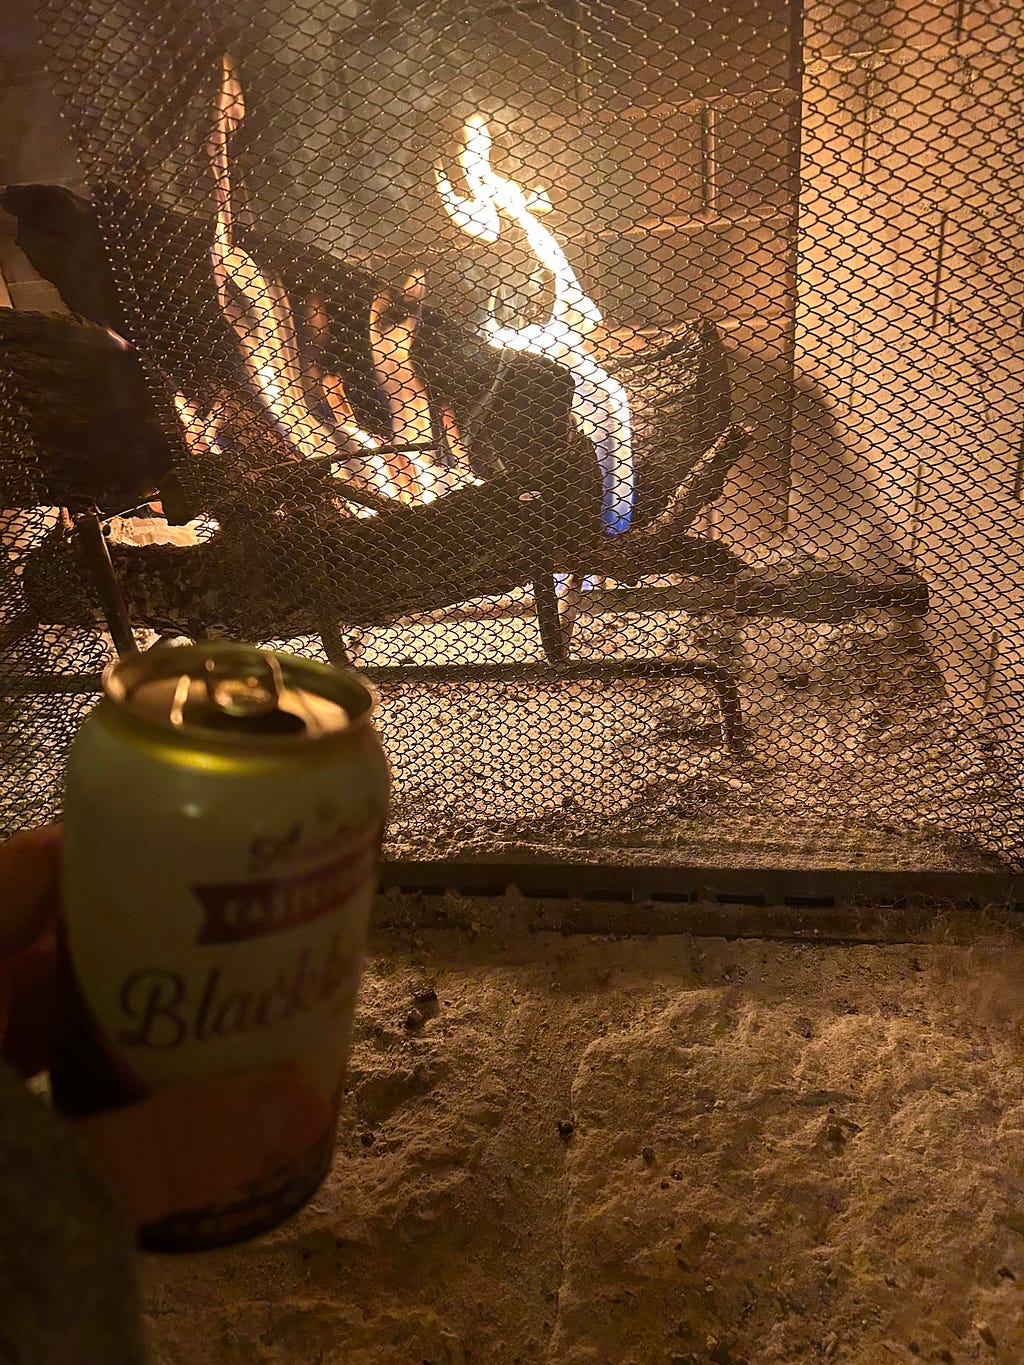 A can of Blackberry Cider front left, lit fireplace in the background.